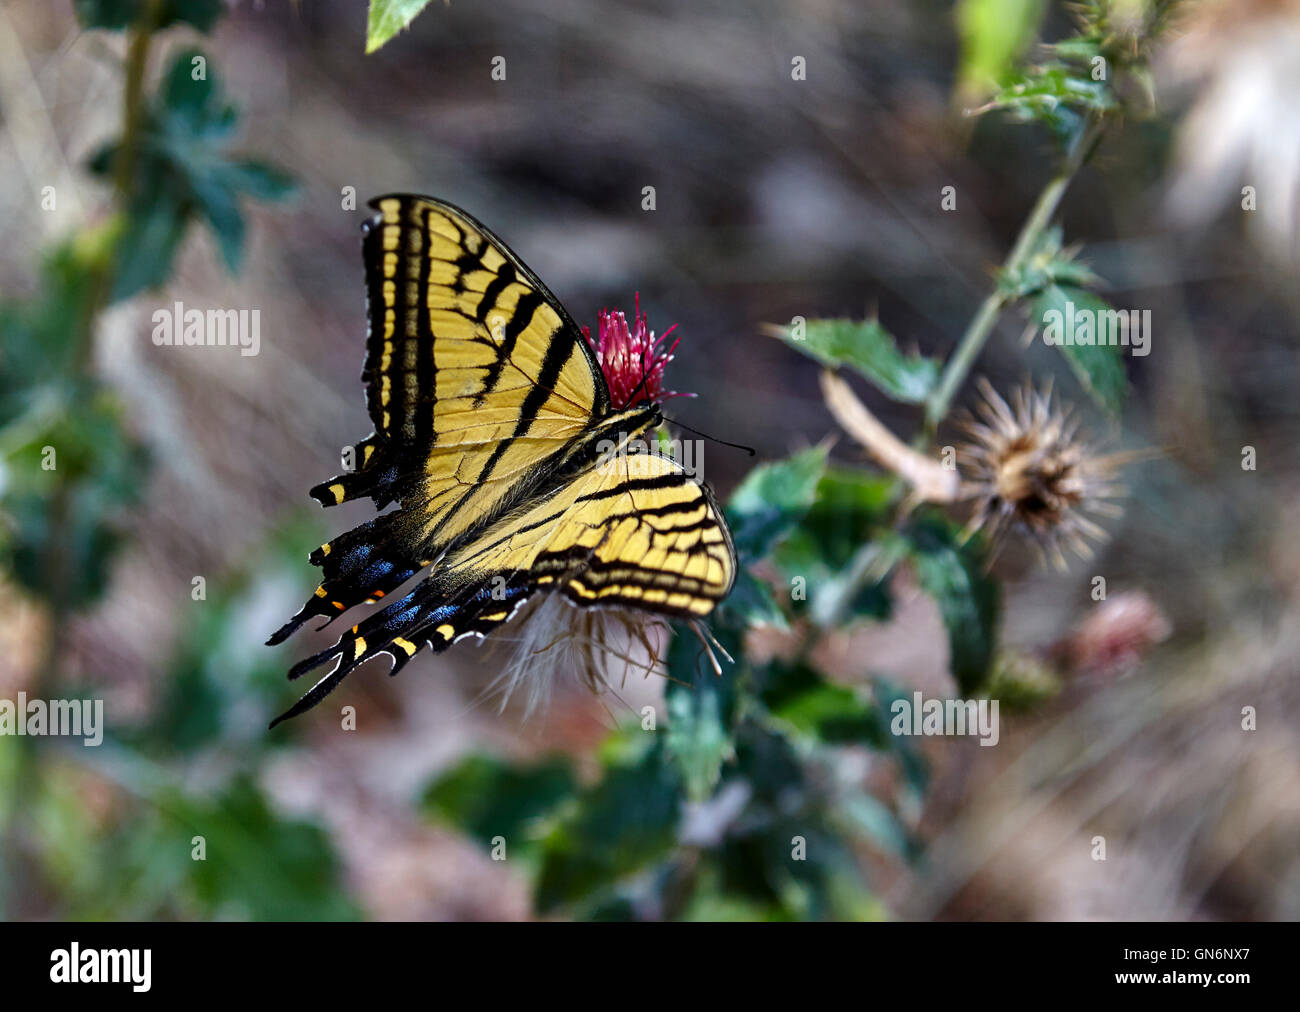 Gold Black Butterfly Stock Photos and Pictures - 13,341 Images